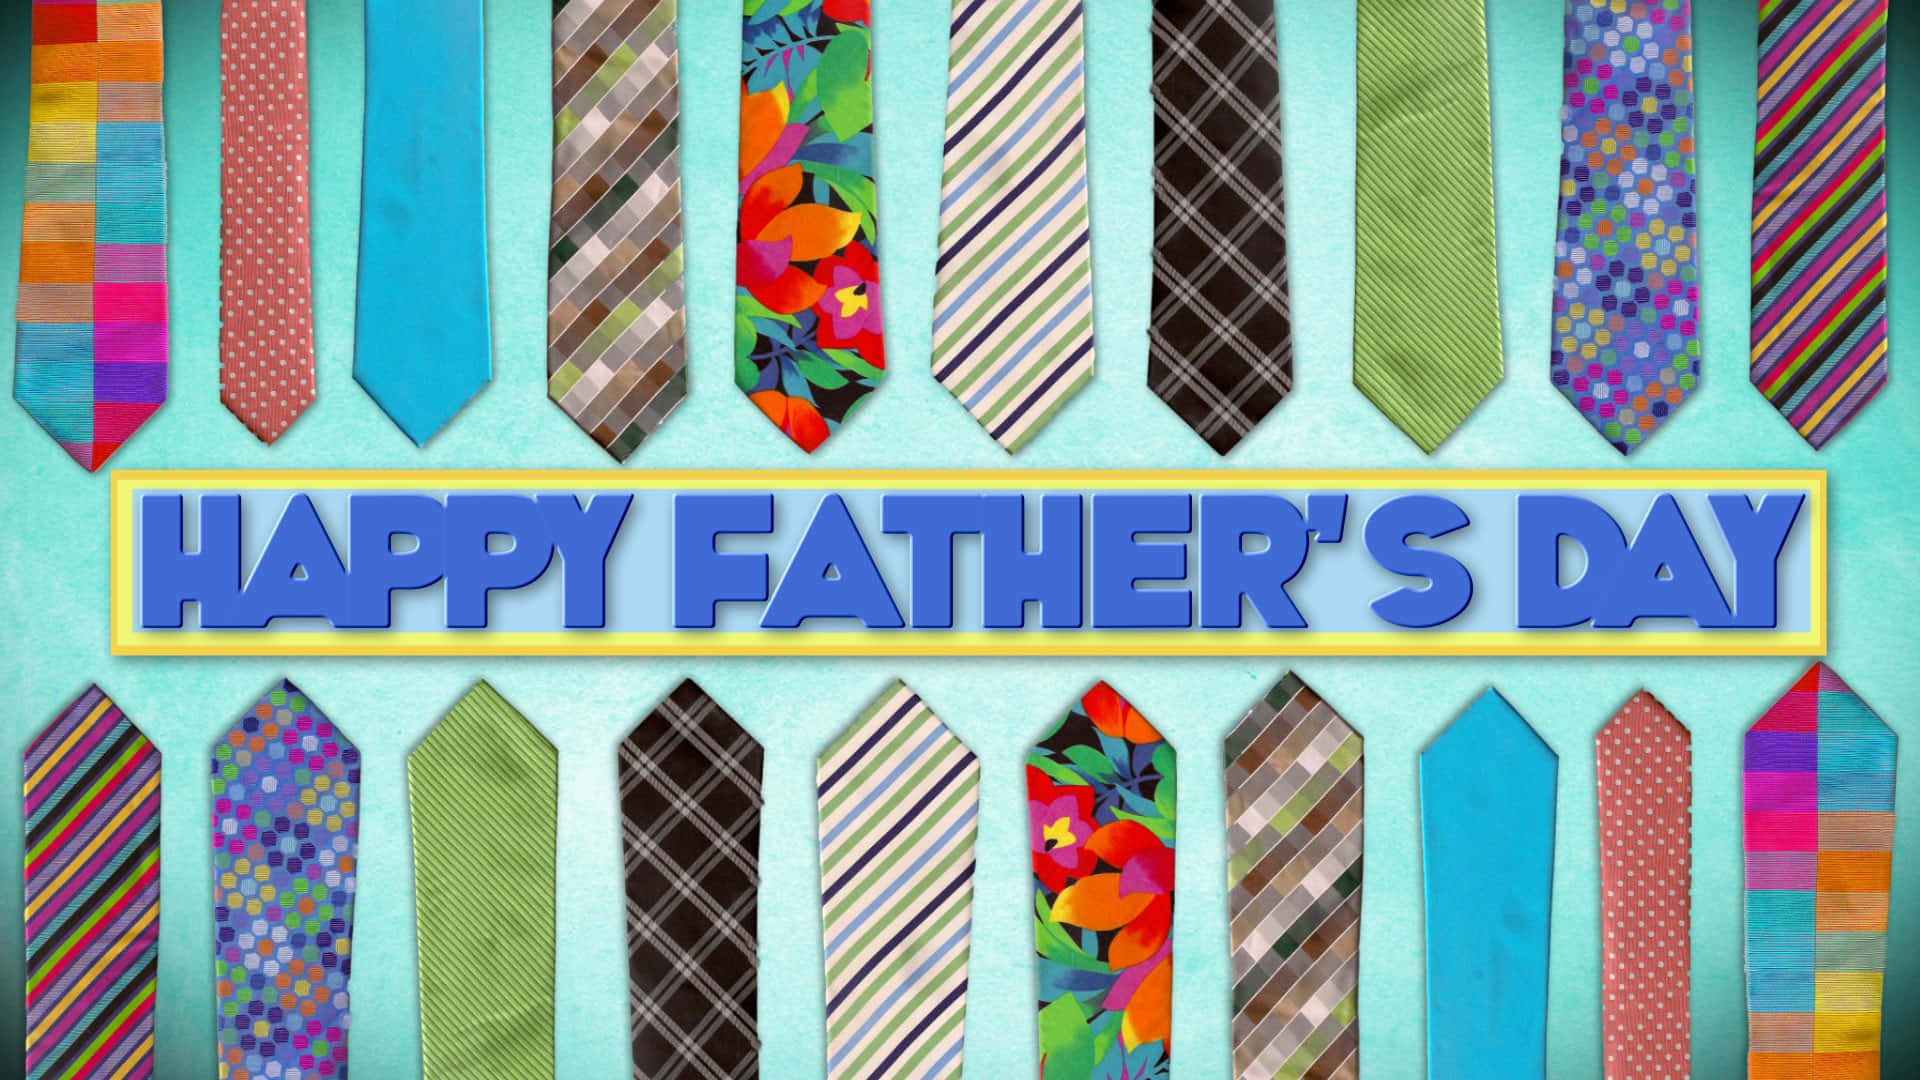 Celebrate Father's Day with those who mean the most